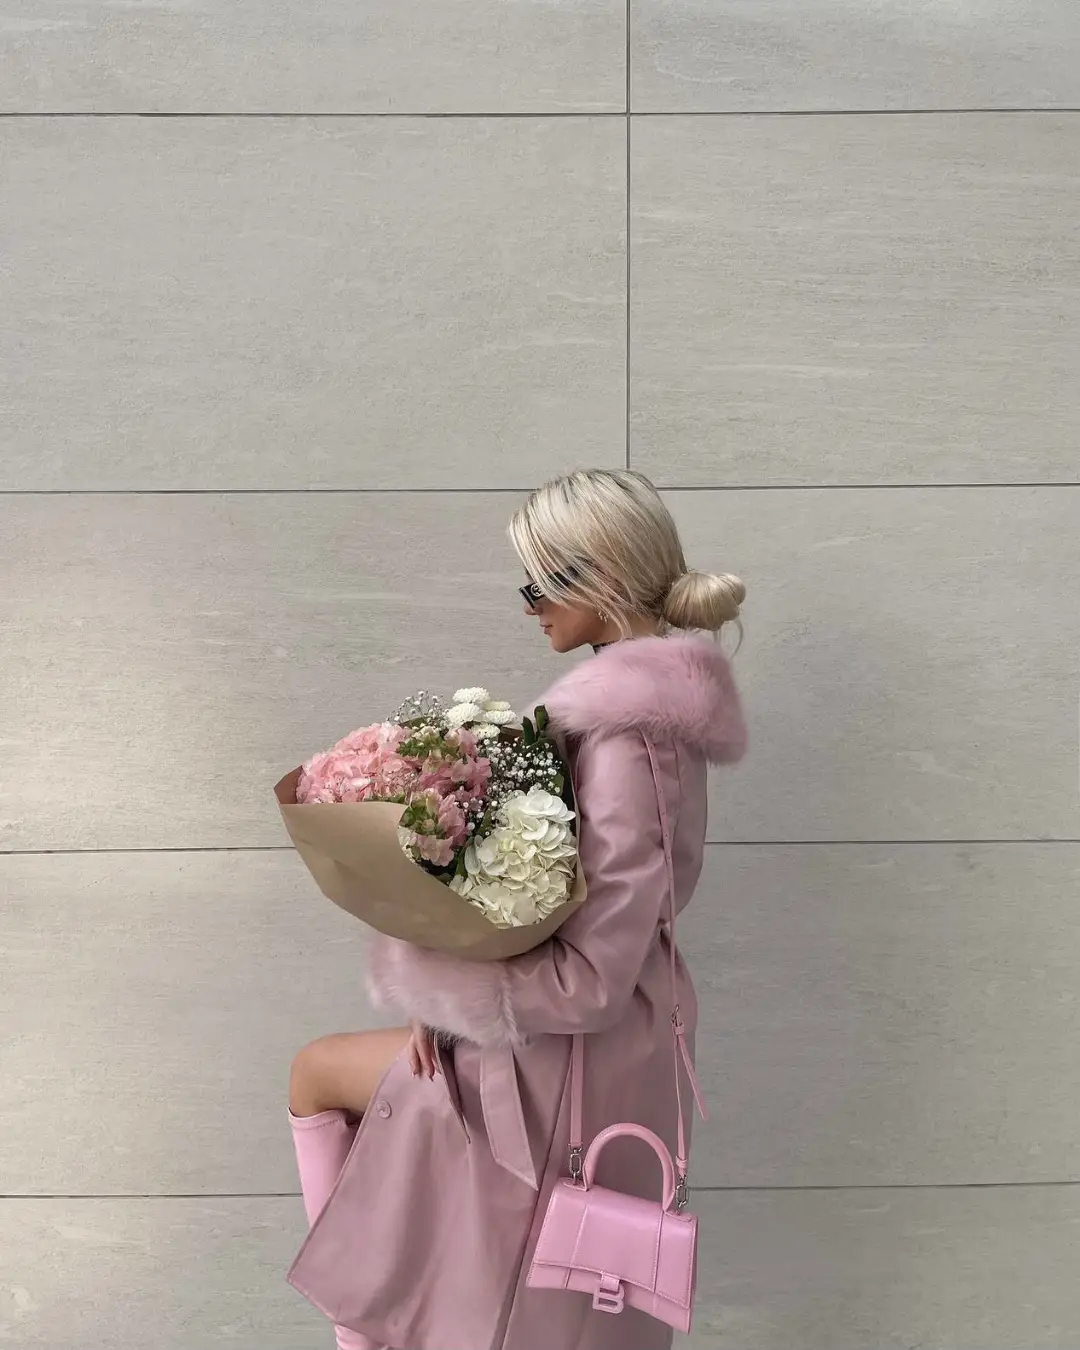  A woman in a pink coat and pink purse is holding a bouquet of flowers.